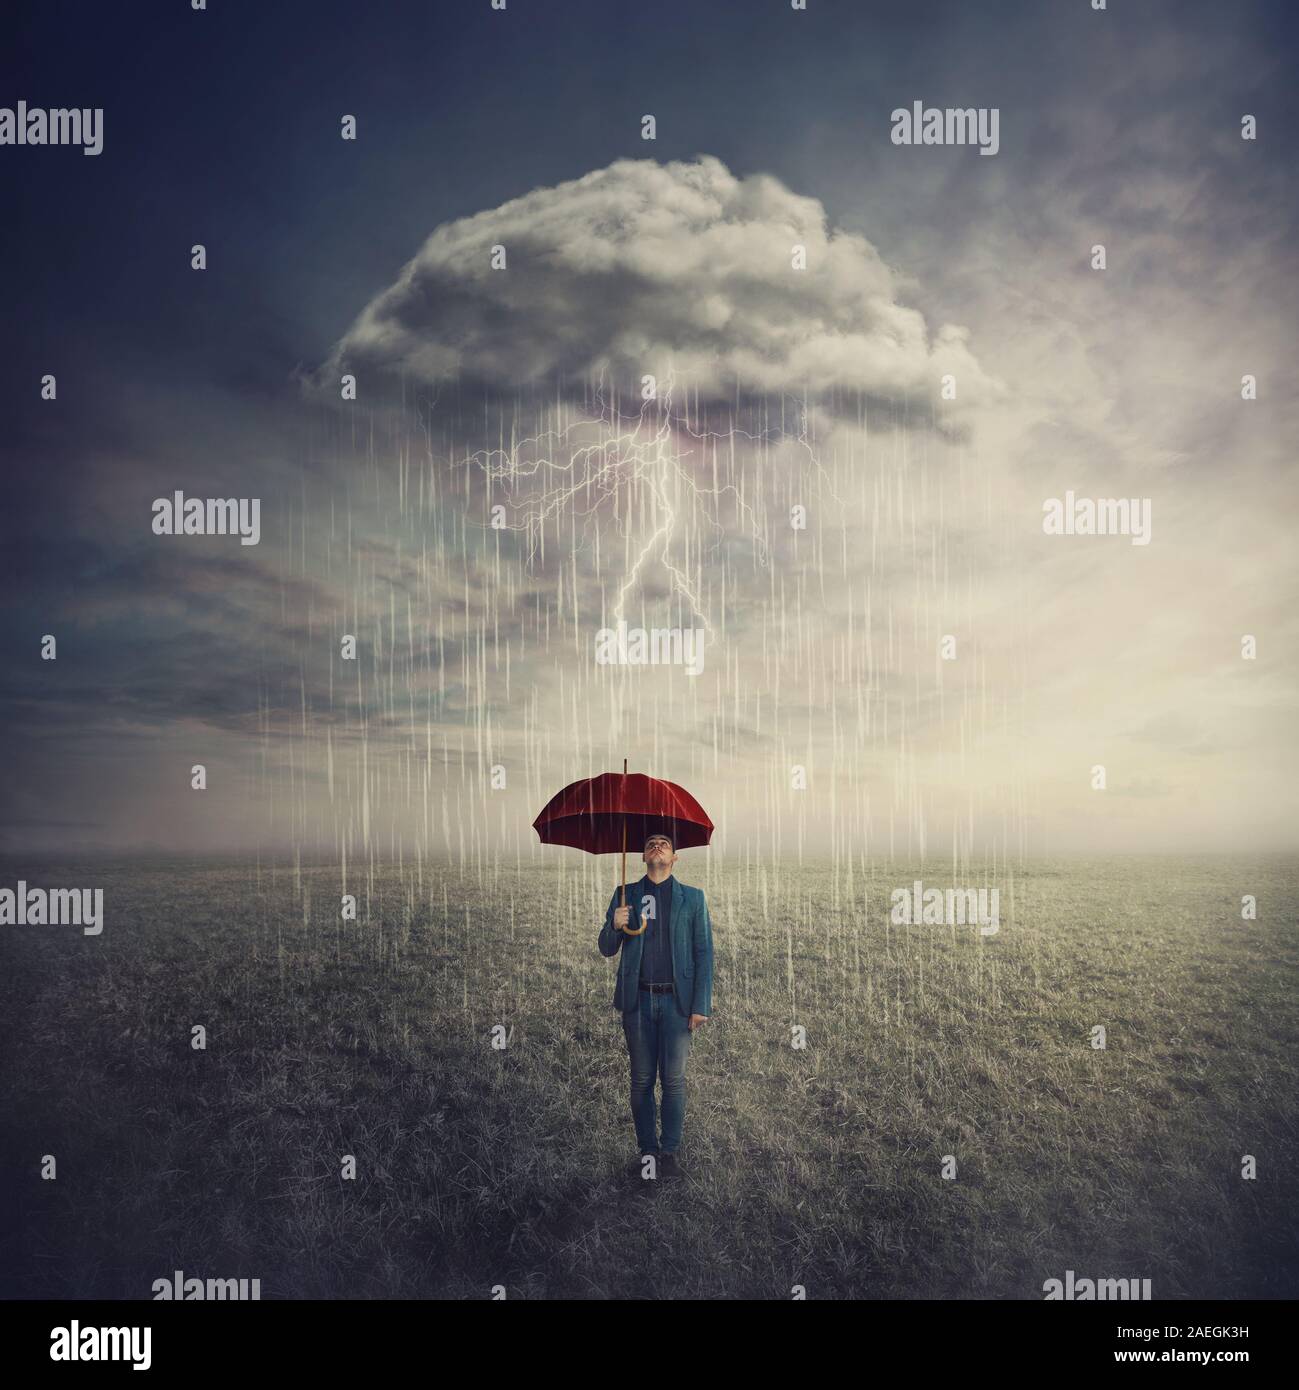 Surreal scene as man stands outdoors under umbrella due a single mysterious storm cloud raining only over him. Find solution to escape crisis situatio Stock Photo